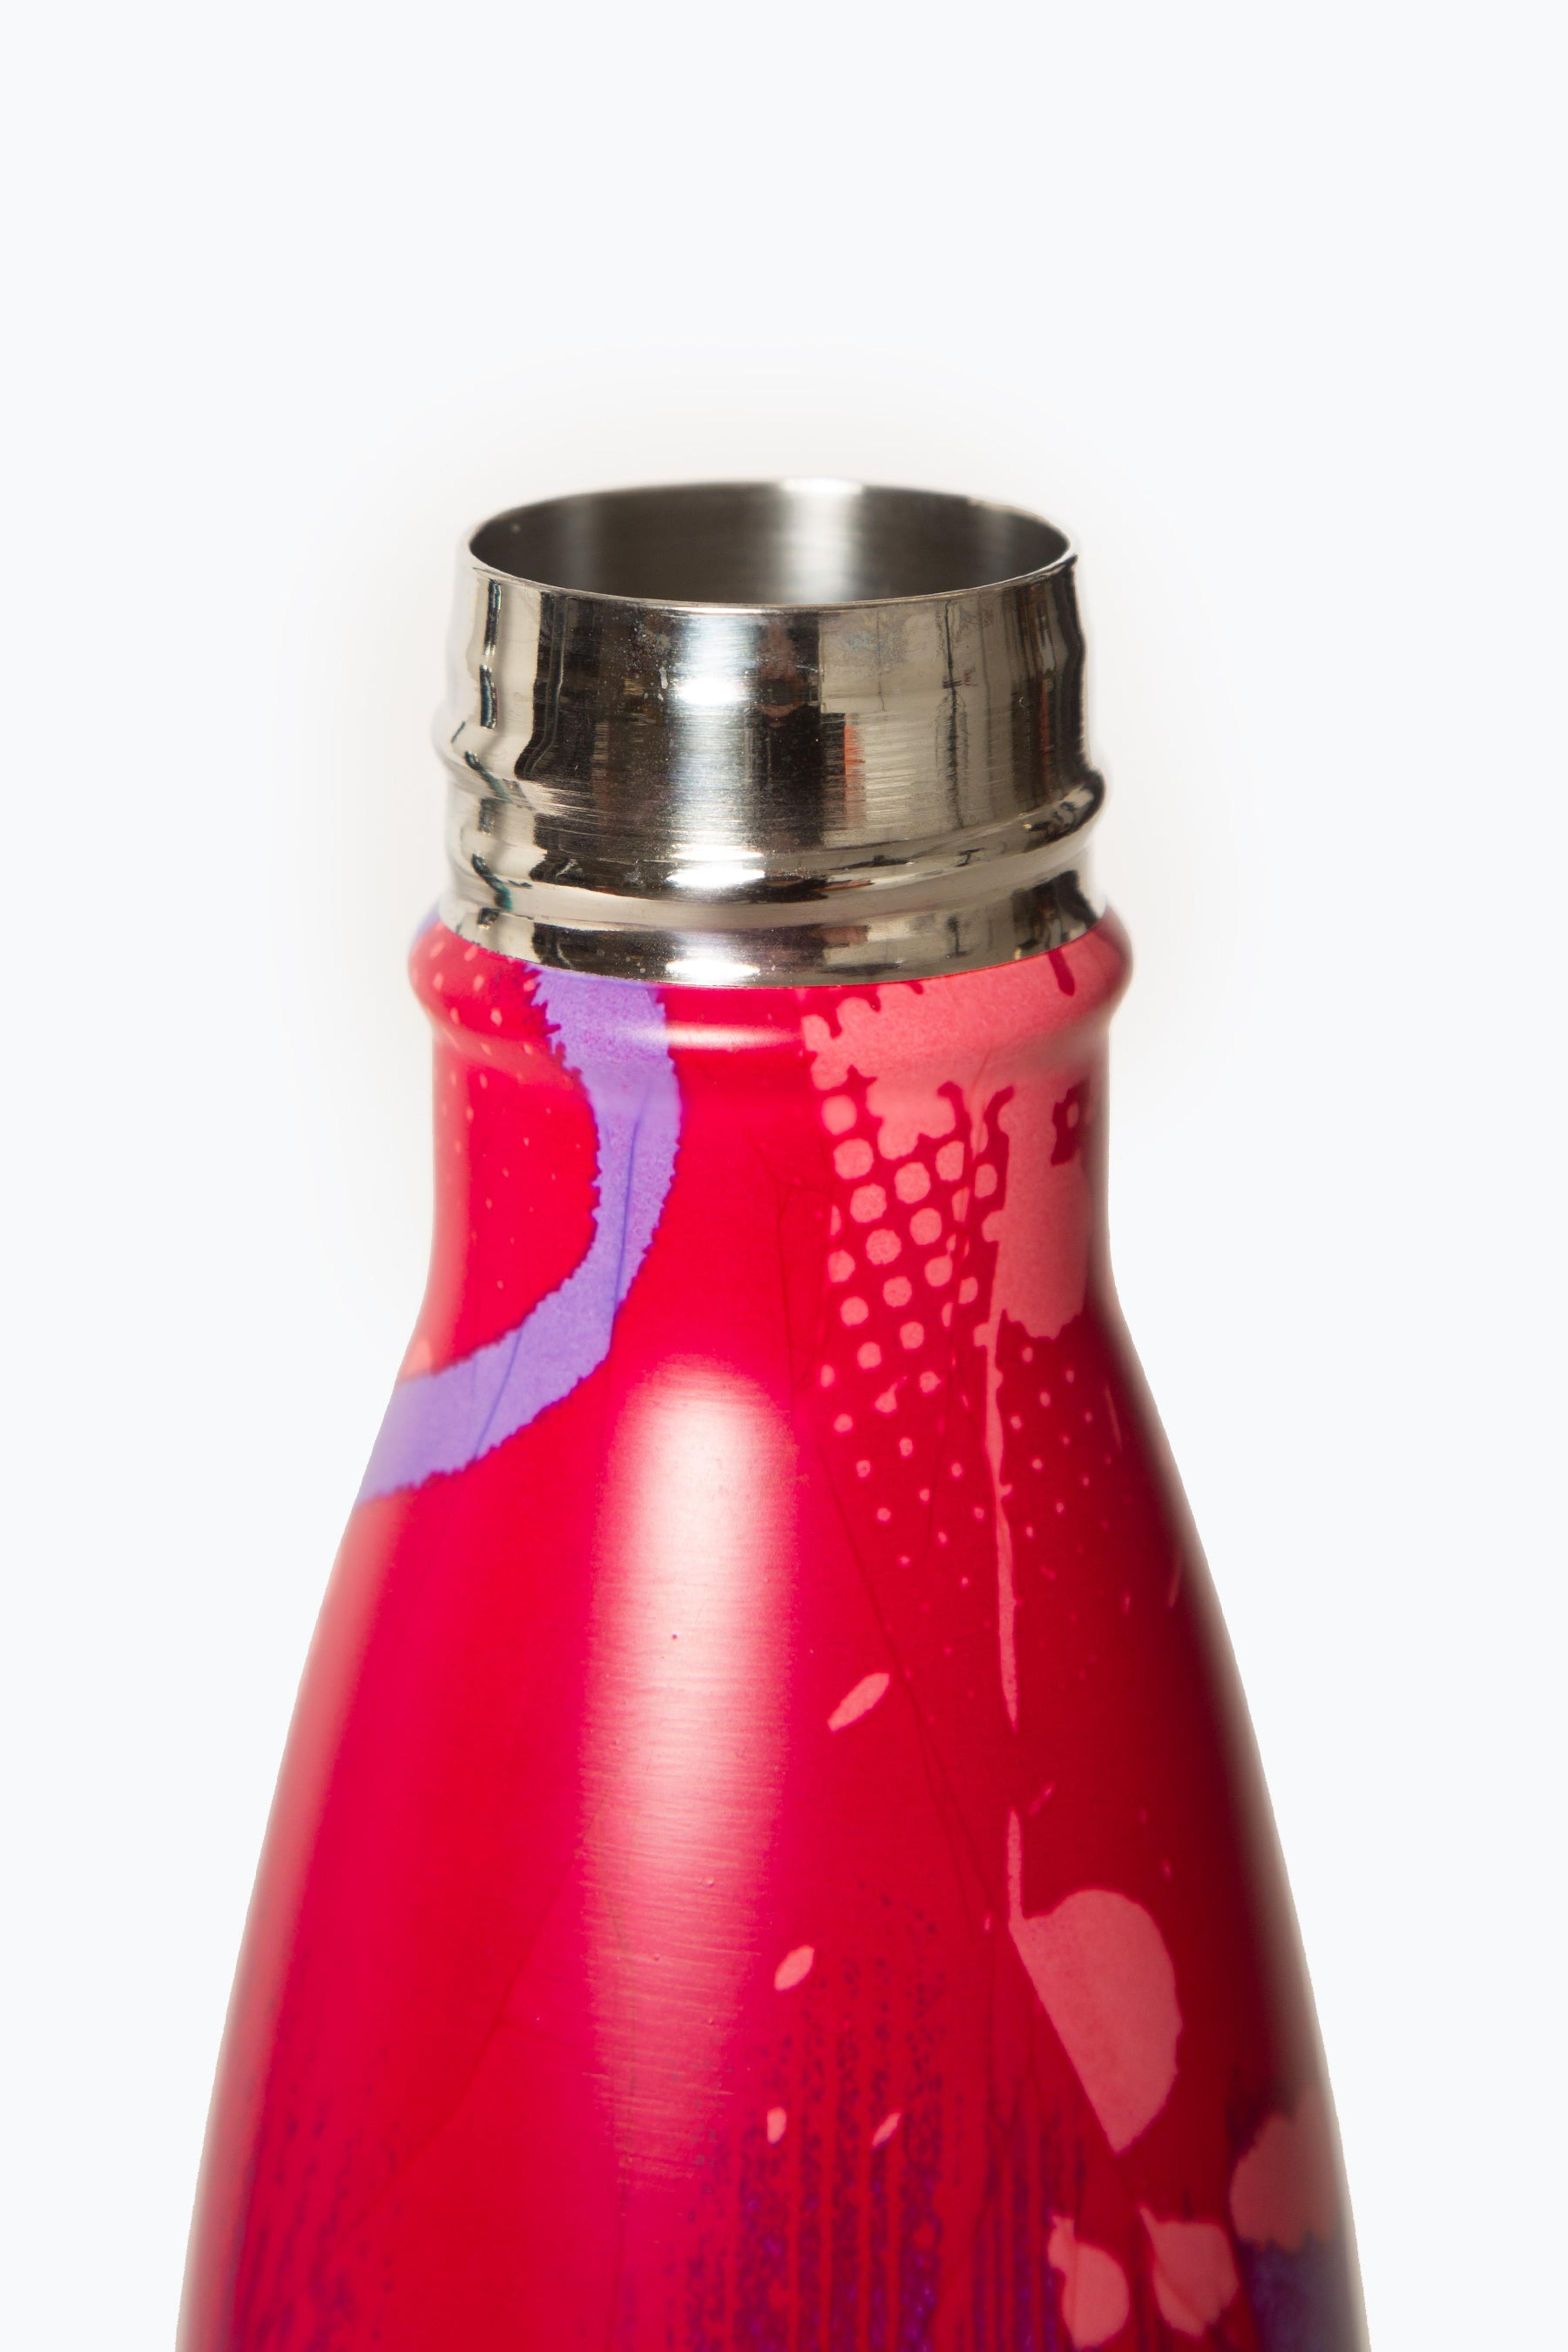 Alternate View 2 of HYPE PINK HEARTS DRIP METAL BOTTLE